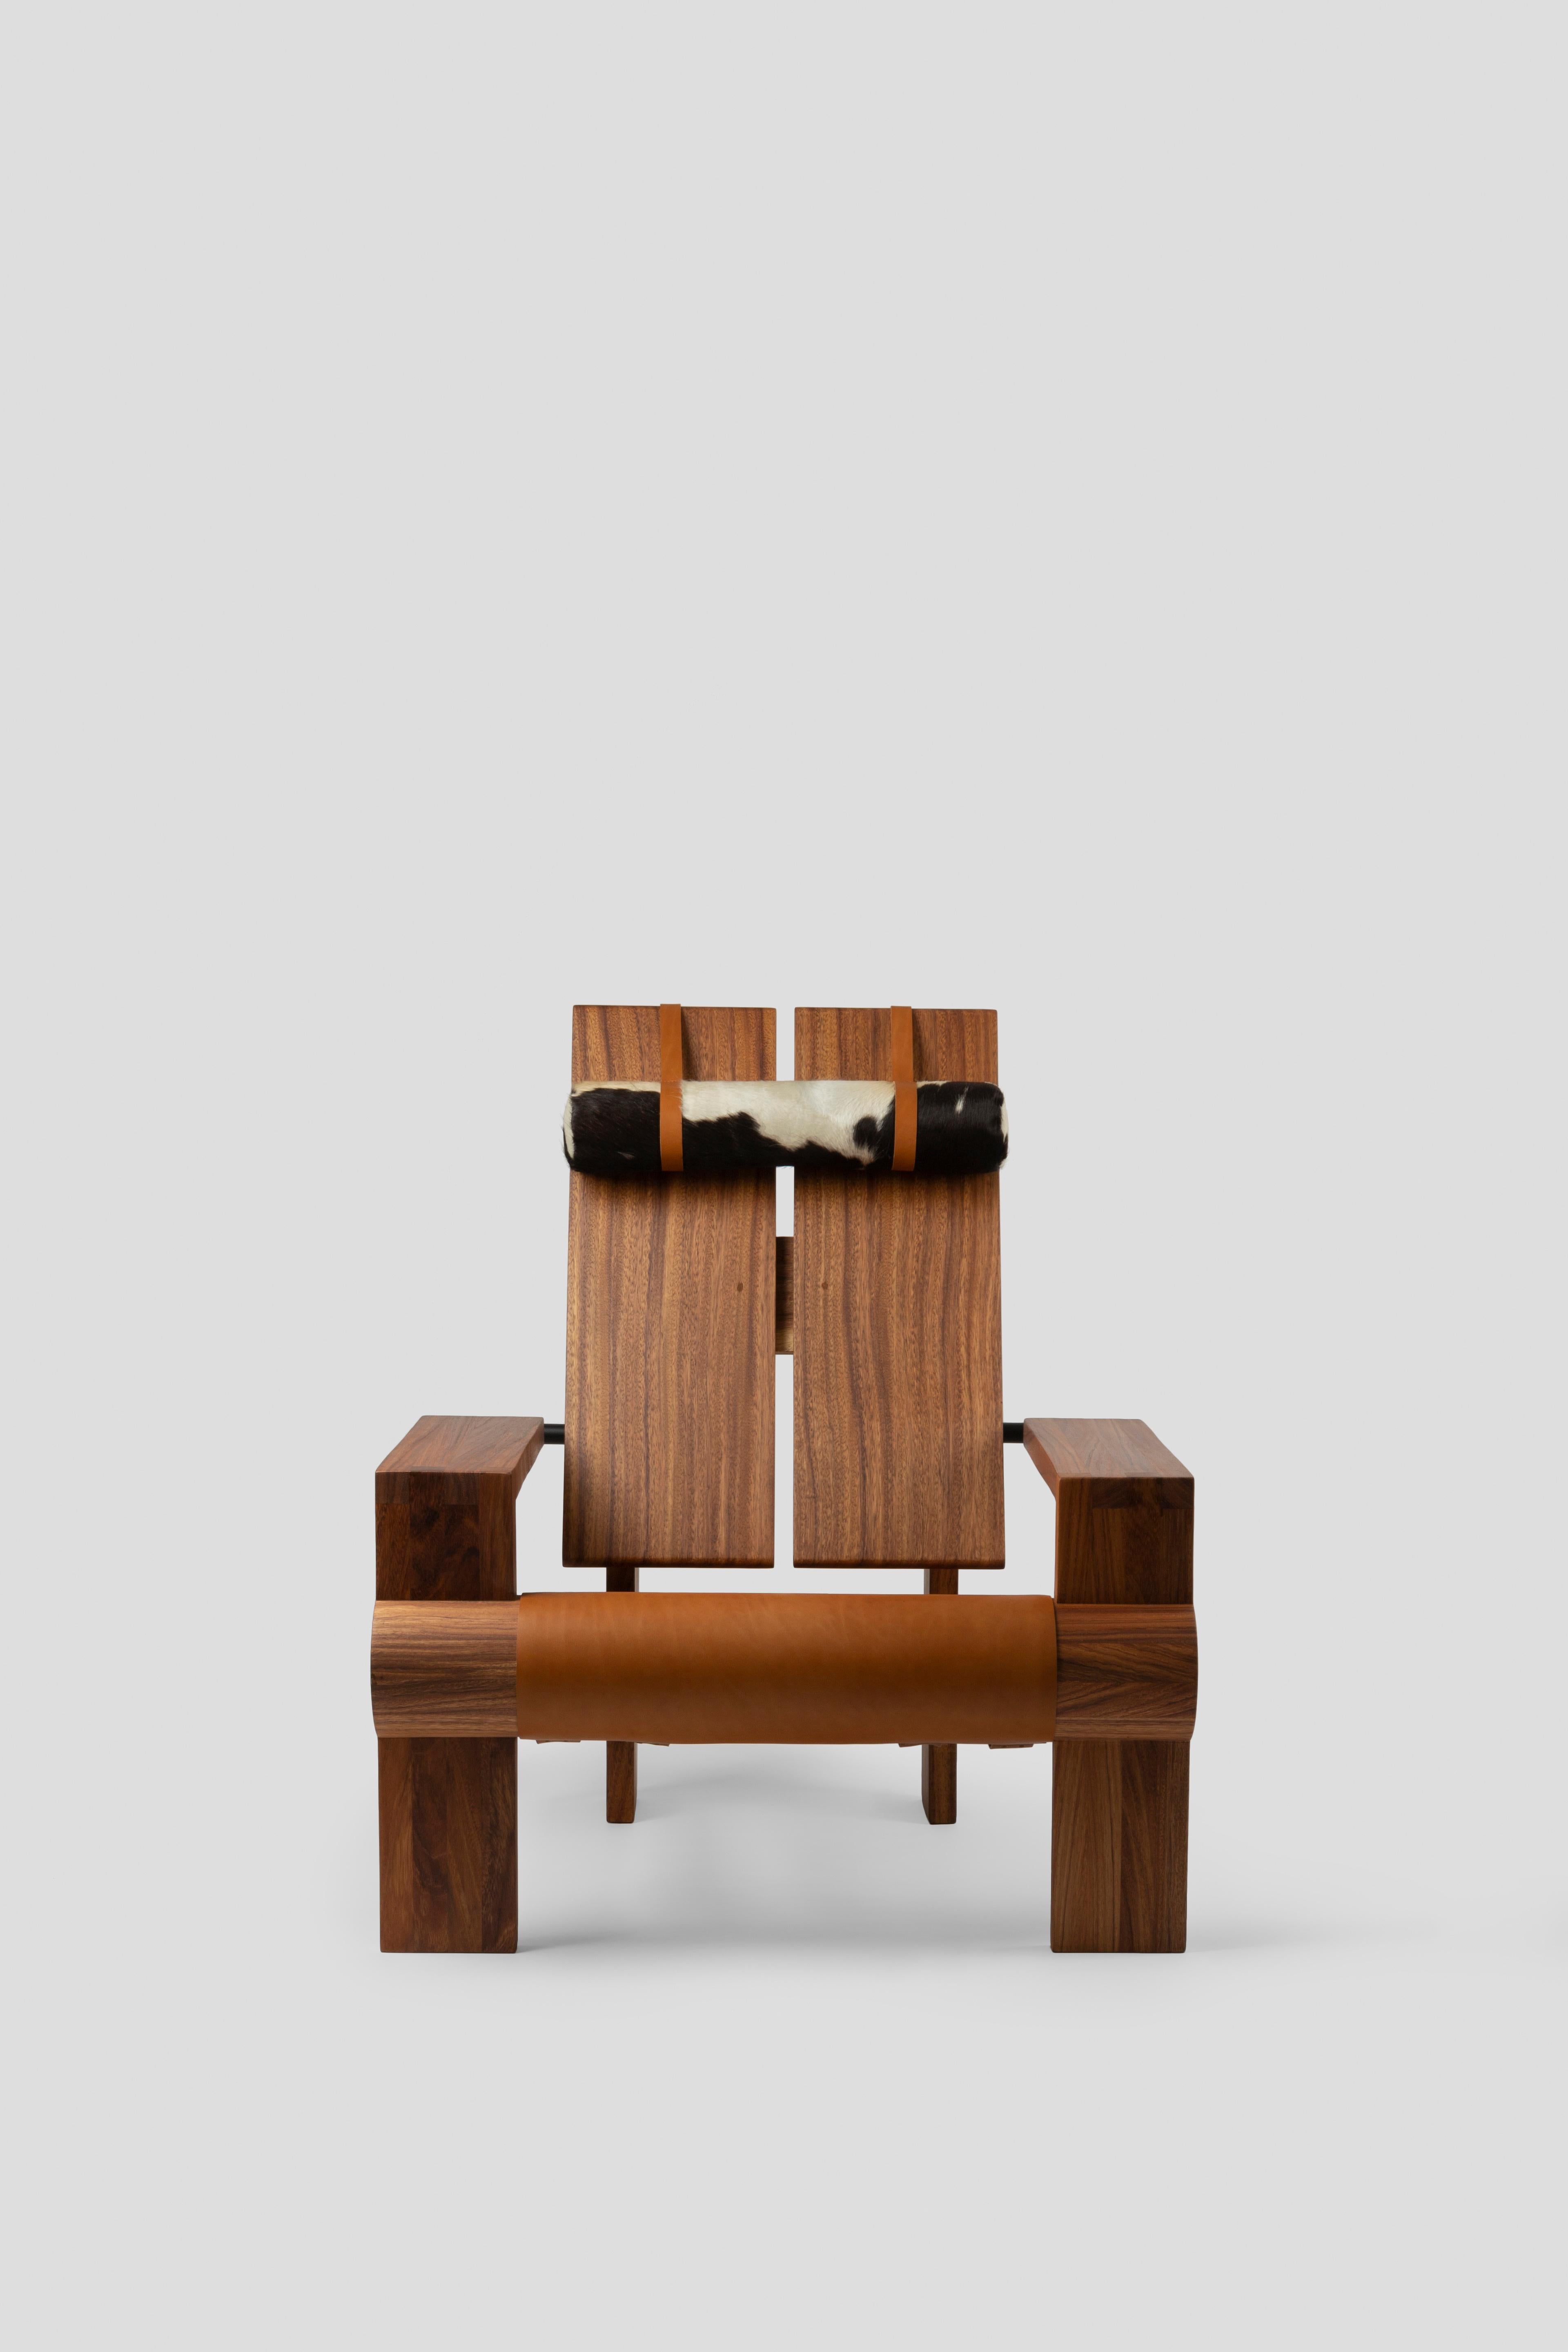 Hand-Crafted San Francisco chair, Leather and Dark Tropical Wood, Contemporary Mexican Design For Sale